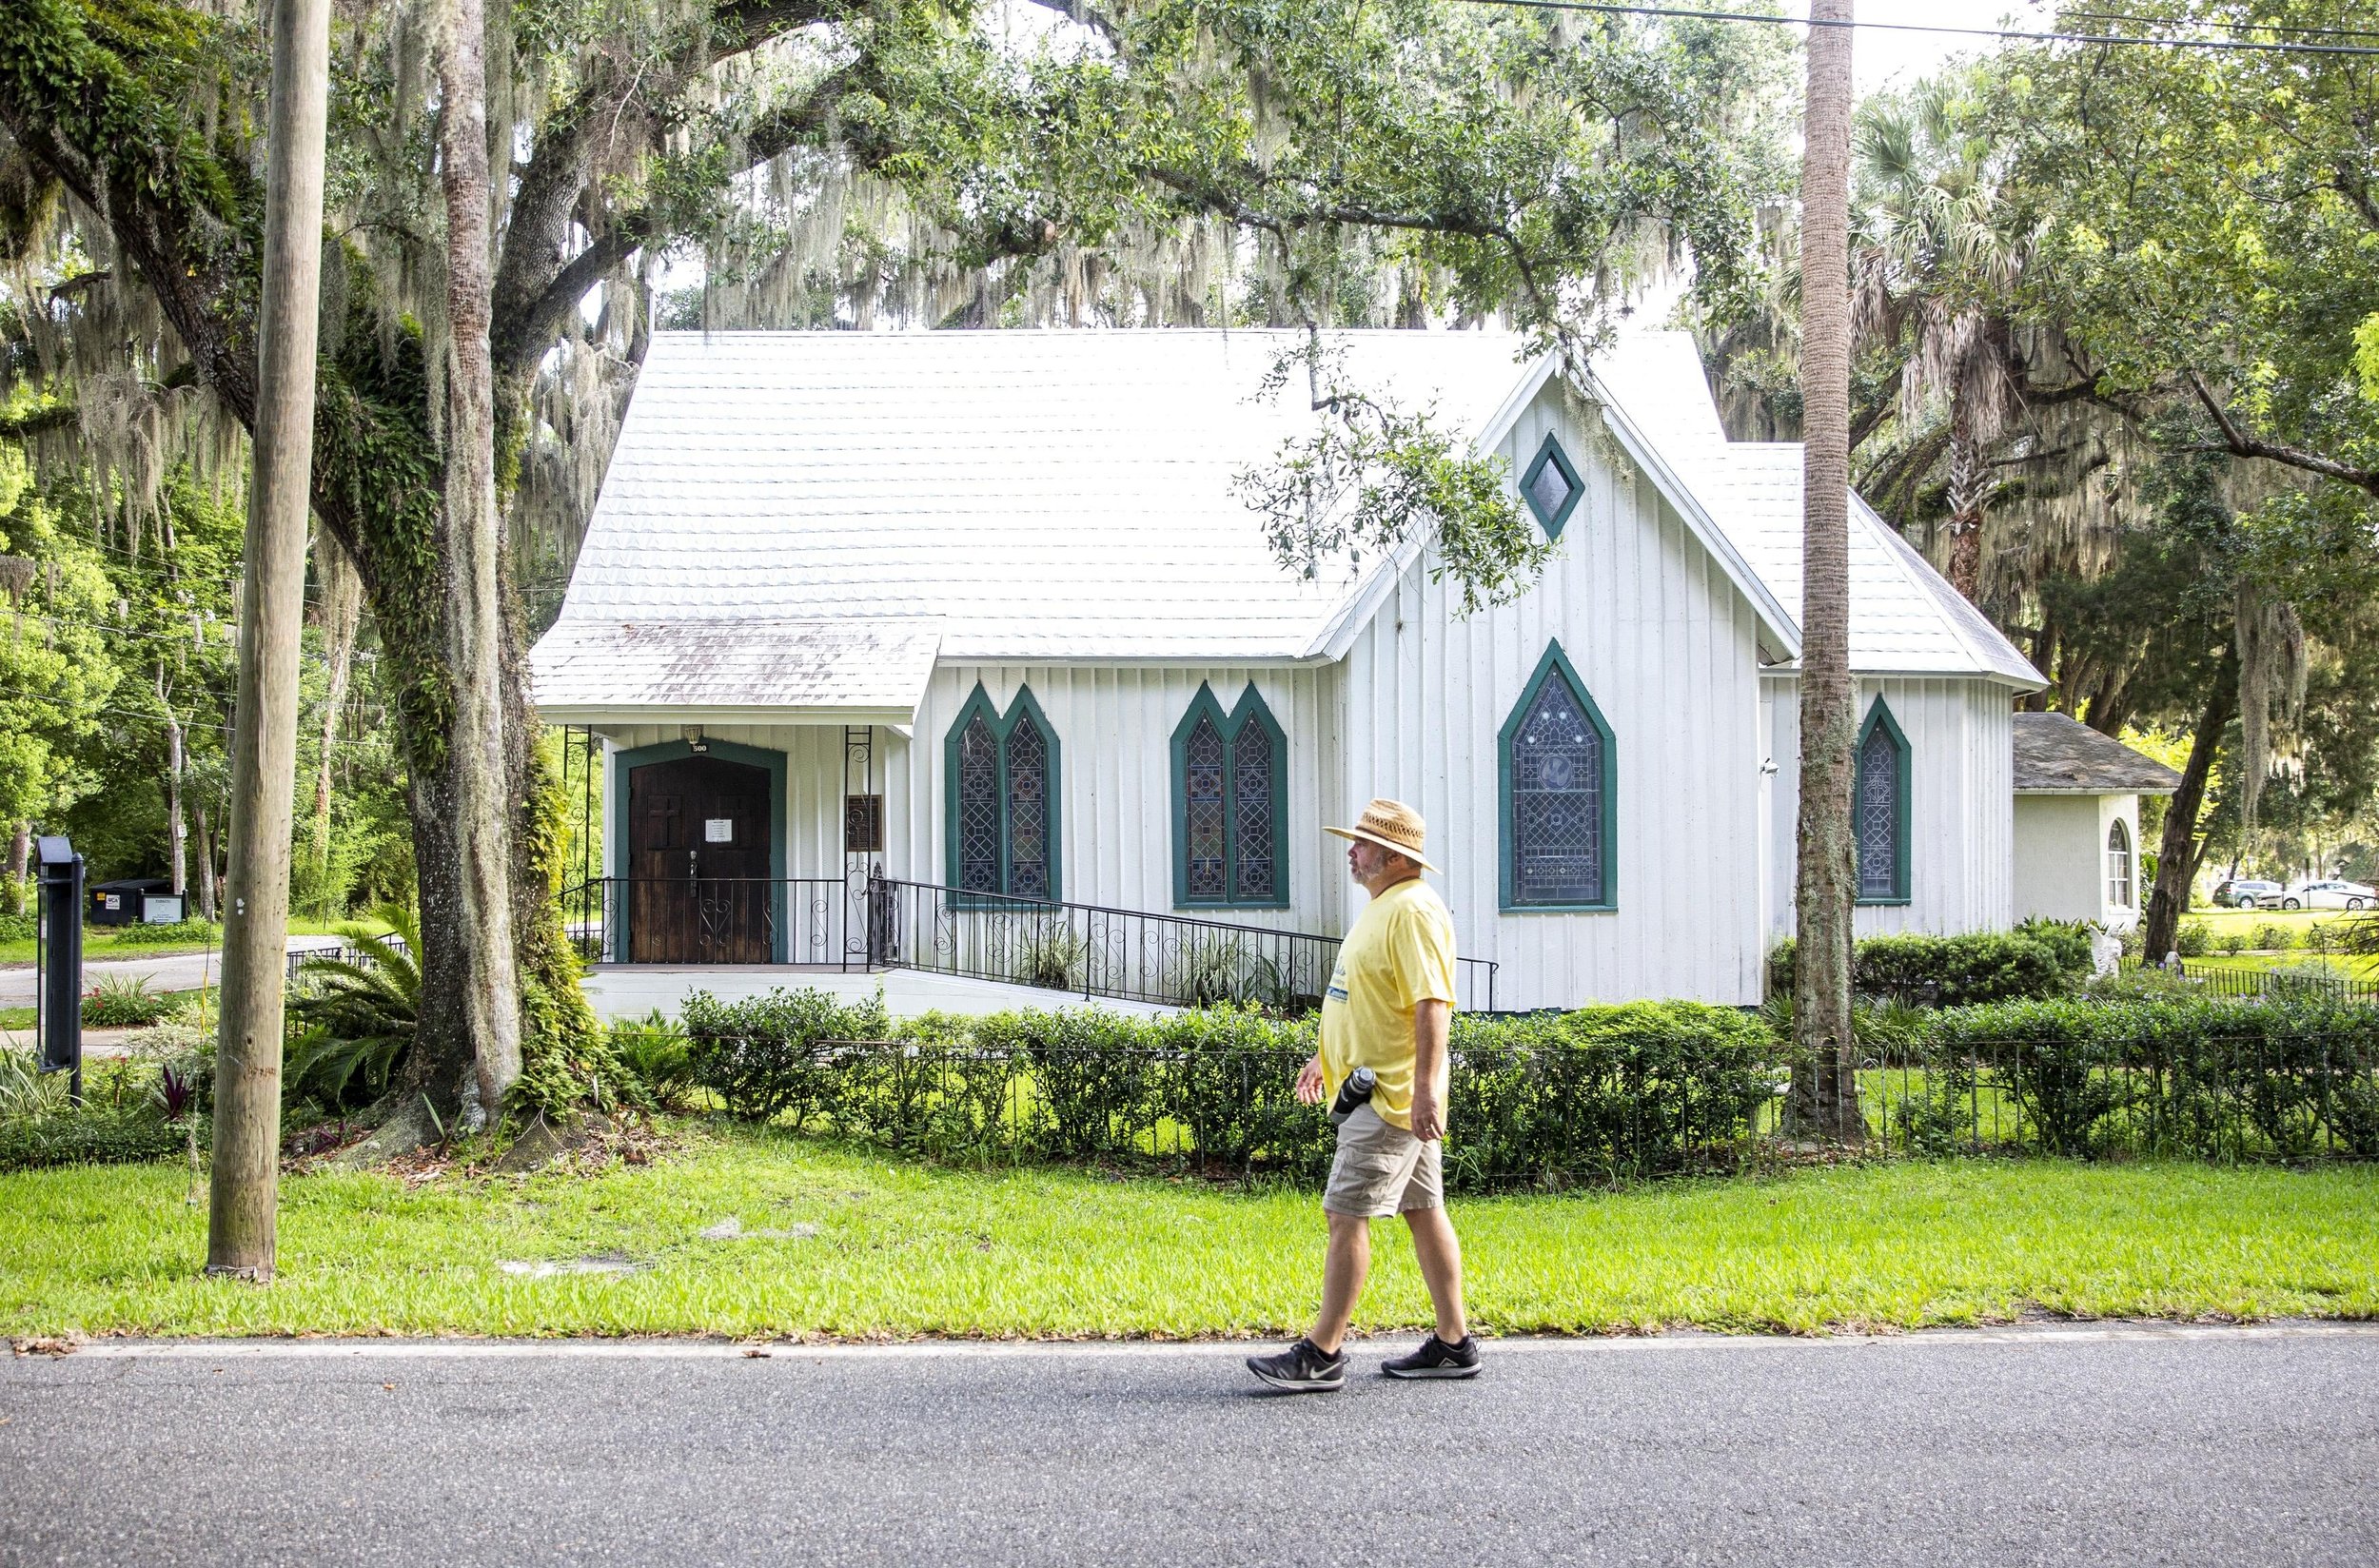  Riley Nutt walks through Enterprise and the All Saints Episcopal Church, of which he is a member, on Tuesday, July 14, 2020. The Enterprise resident is walking from Florida’s Atlantic to Gulf Coast to raise money for the Sao Paulo Mercy Ministry ben